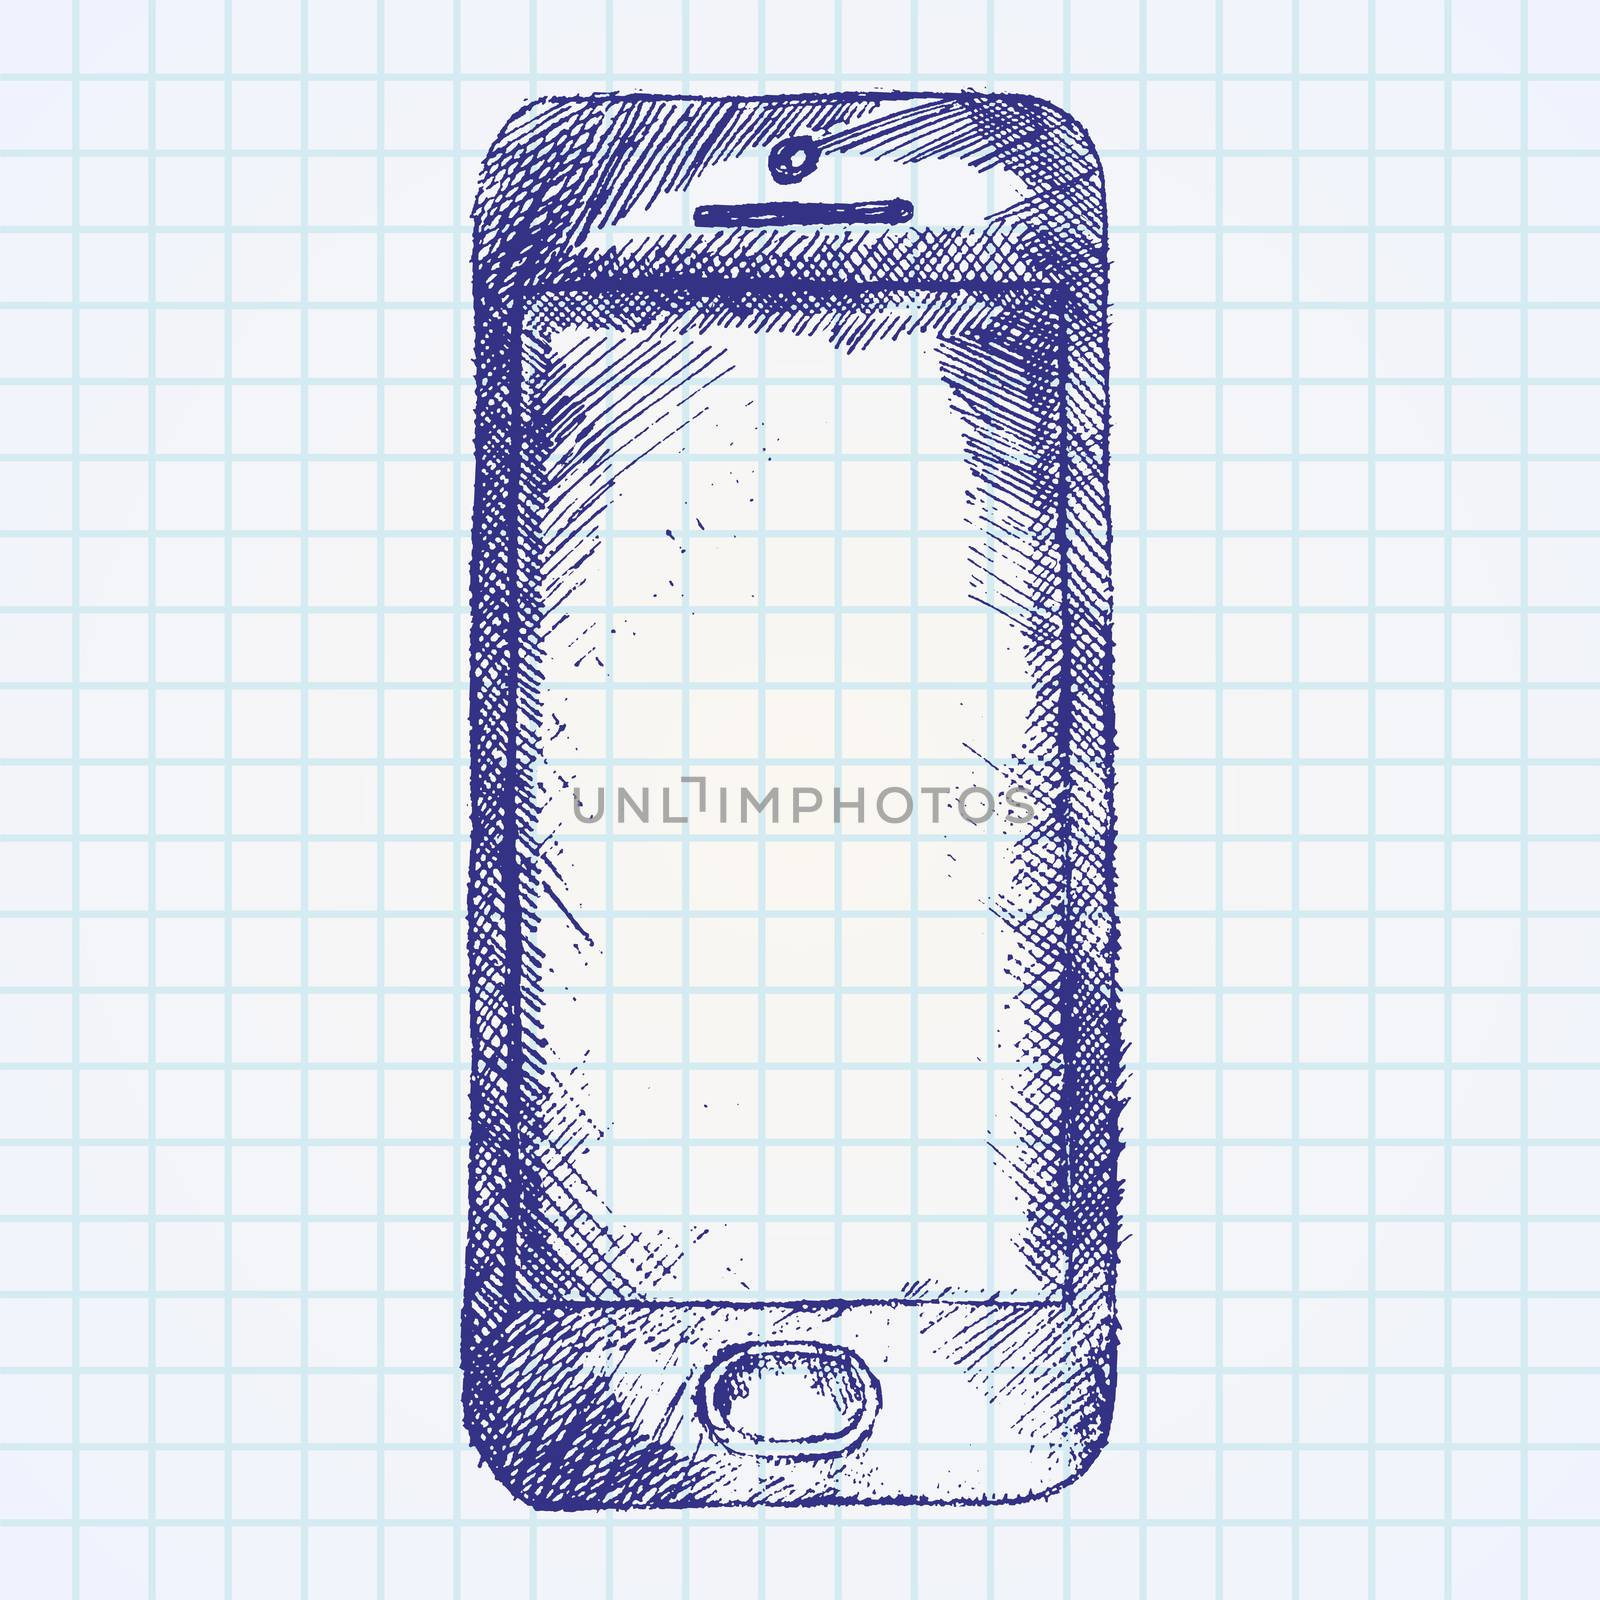 Handdrawn sketch of mobile phone front on paper notebook.